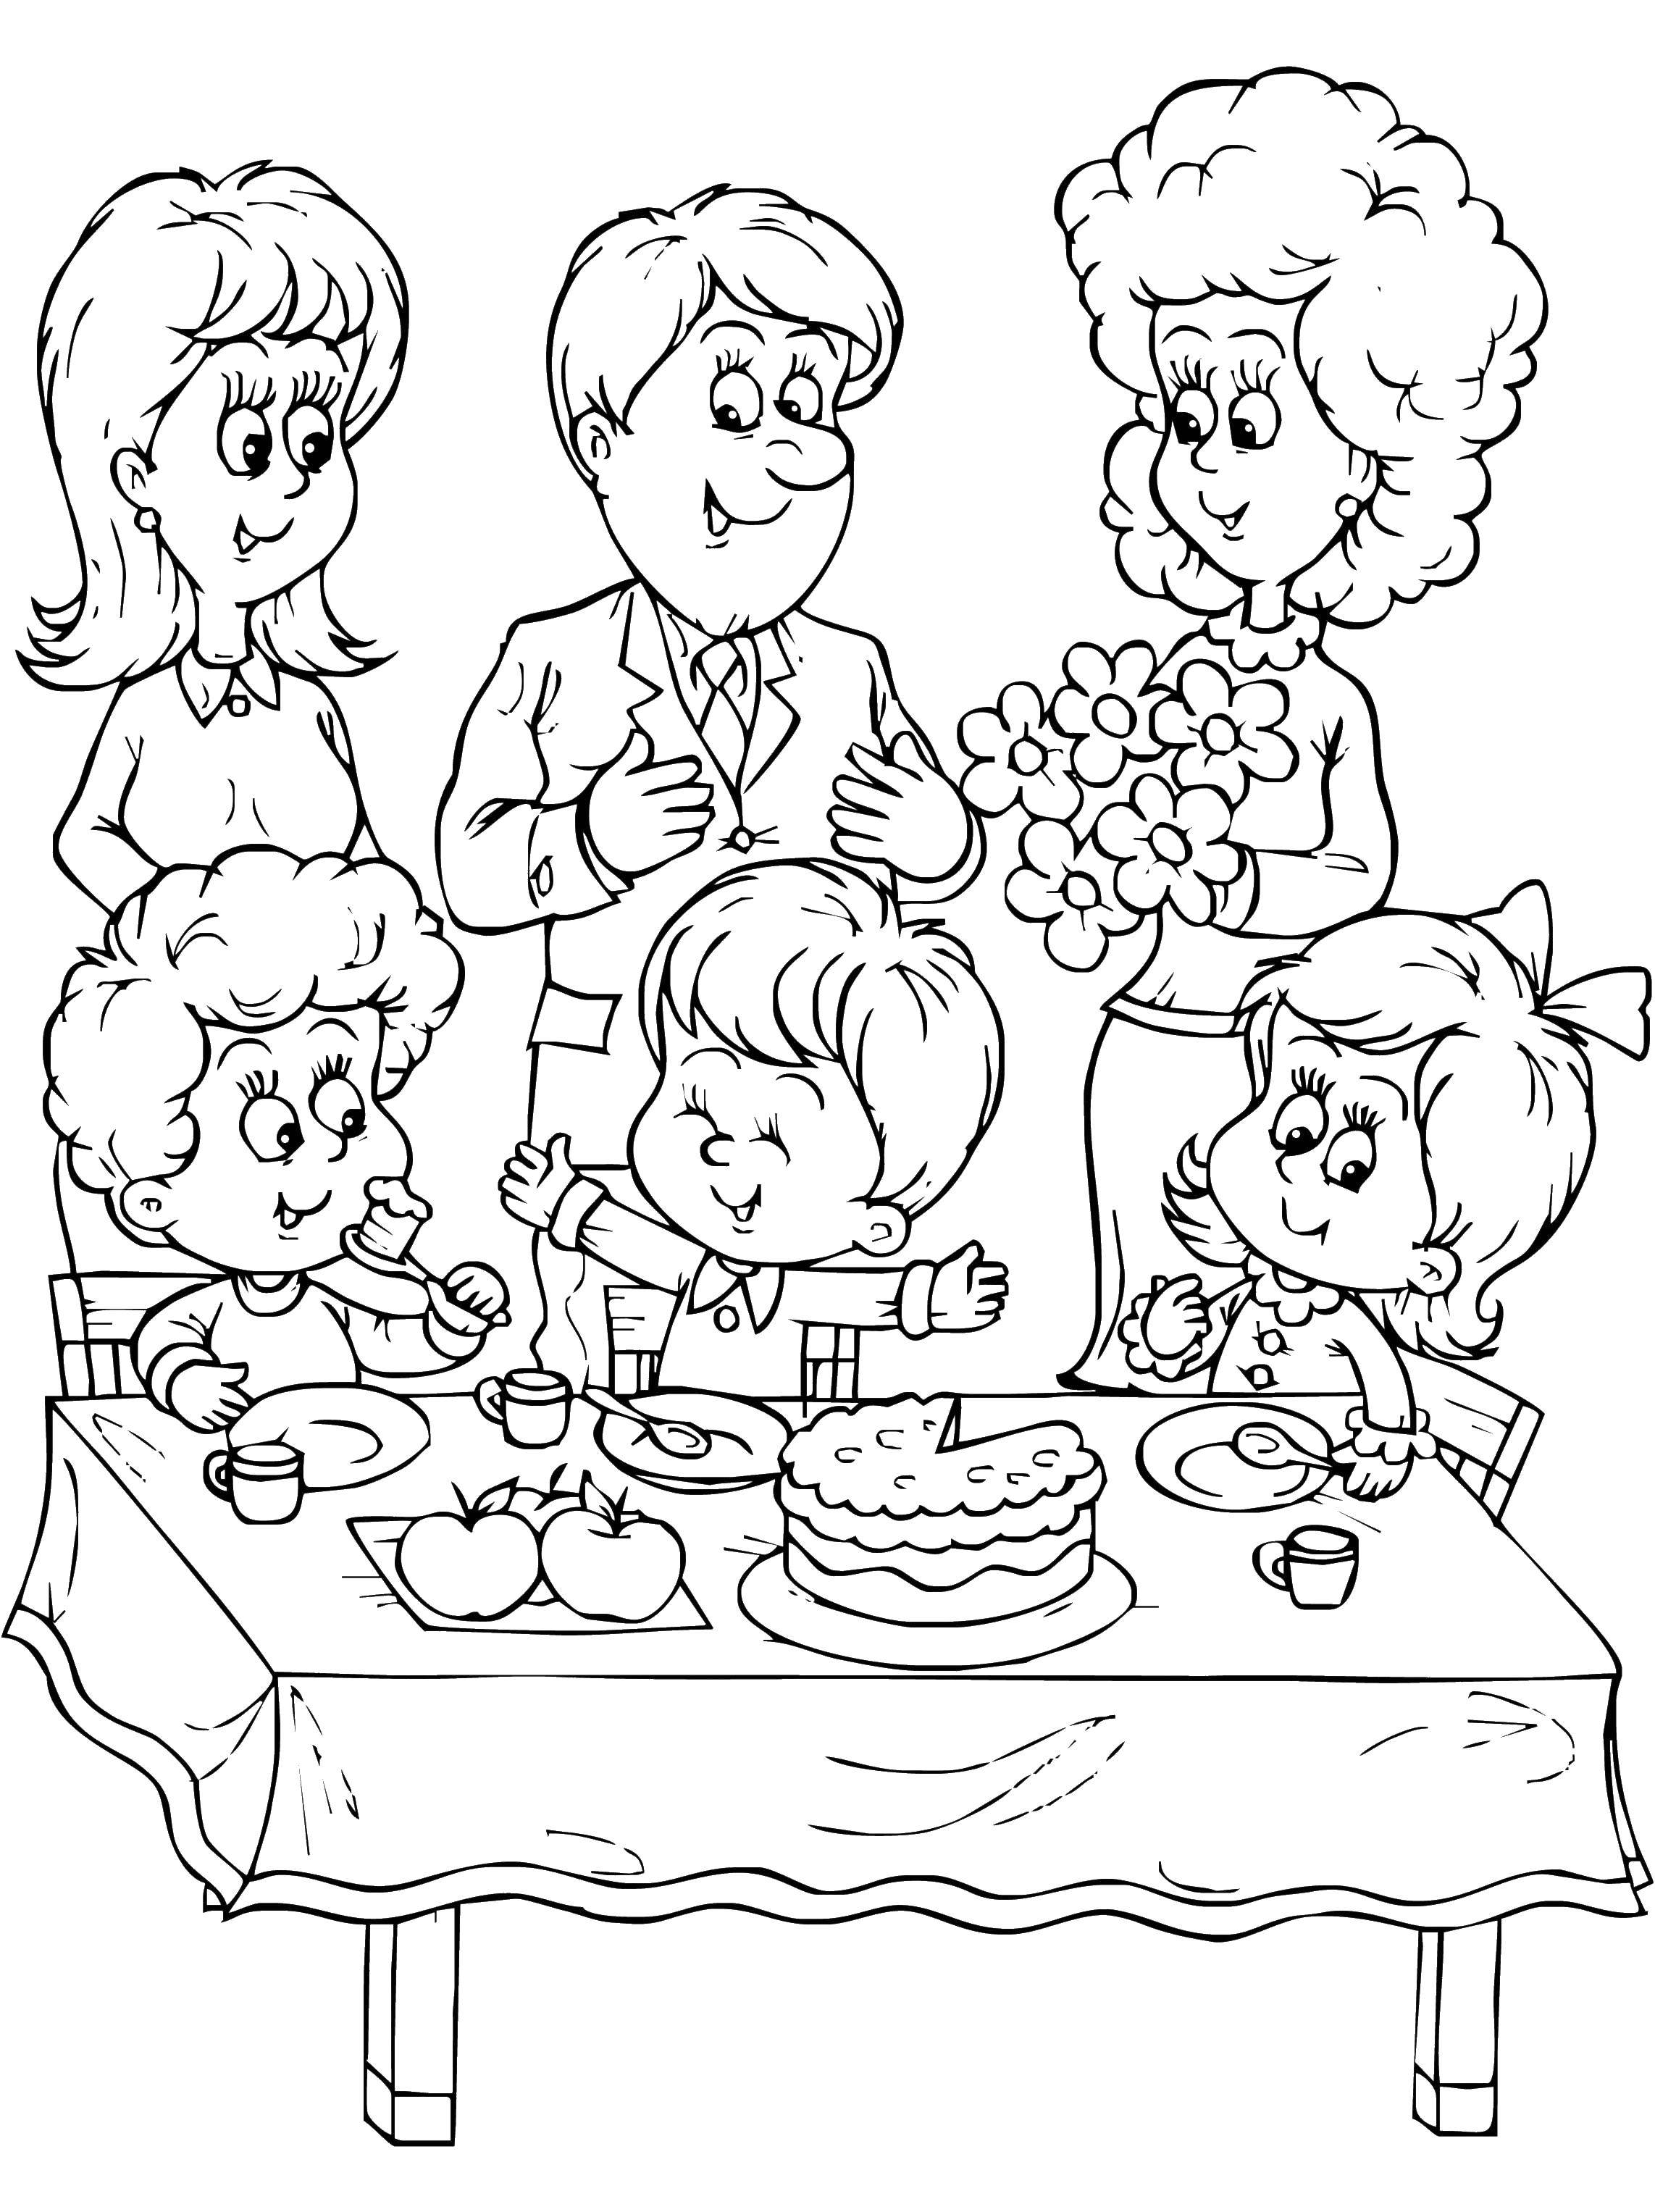 Coloring Family dinner. Category Family members. Tags:  Family, parents, children.